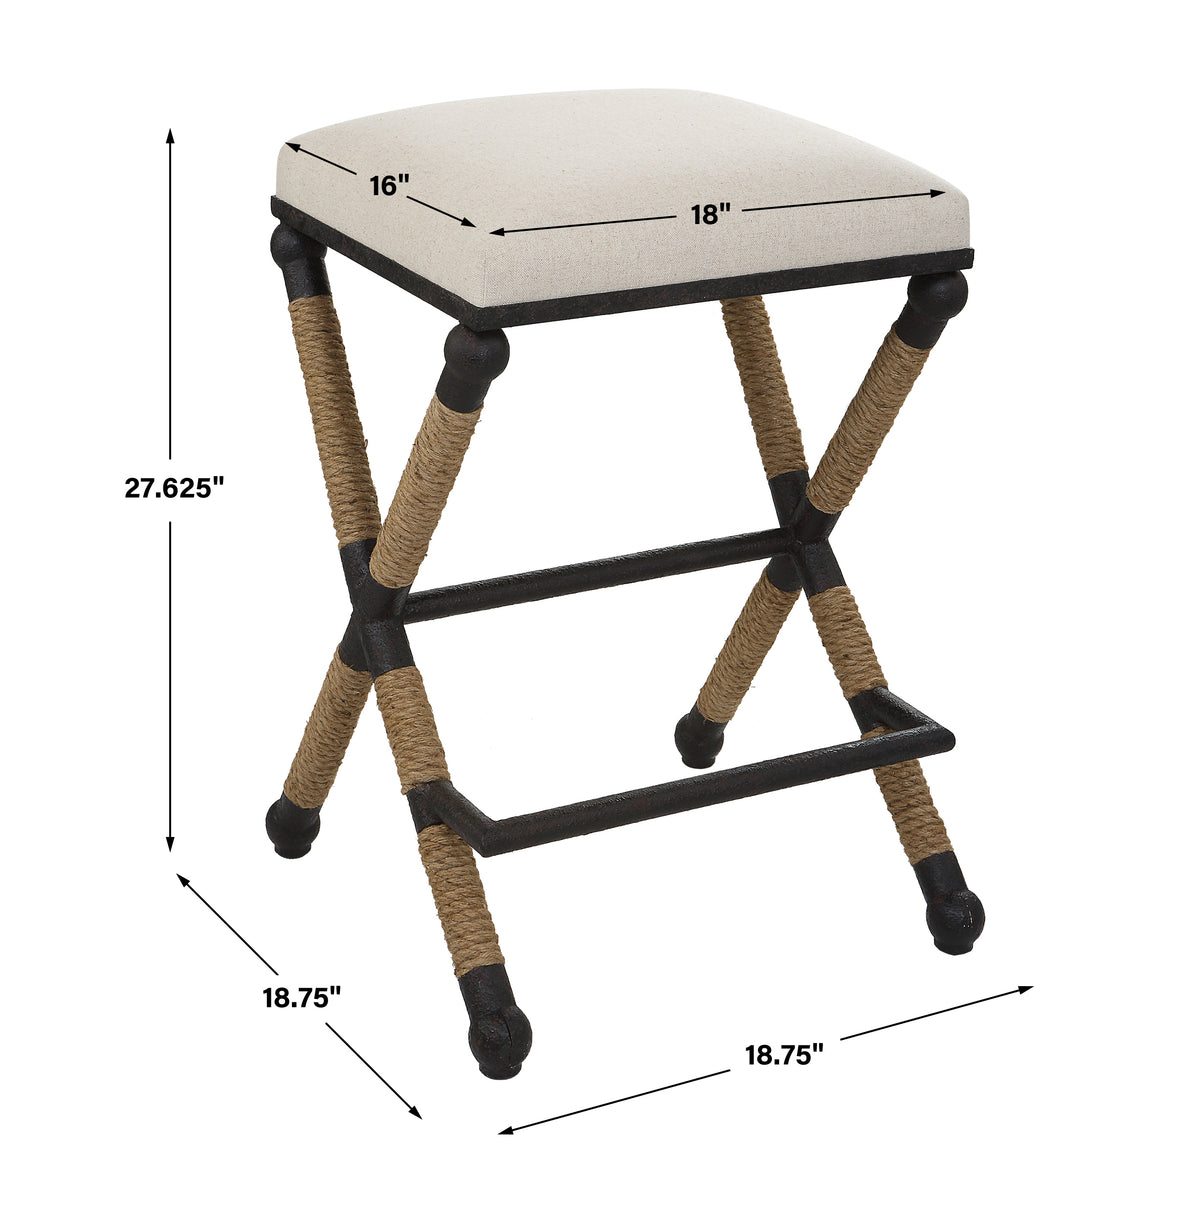 Uttermost Firth Rustic Oatmeal Counter Stool